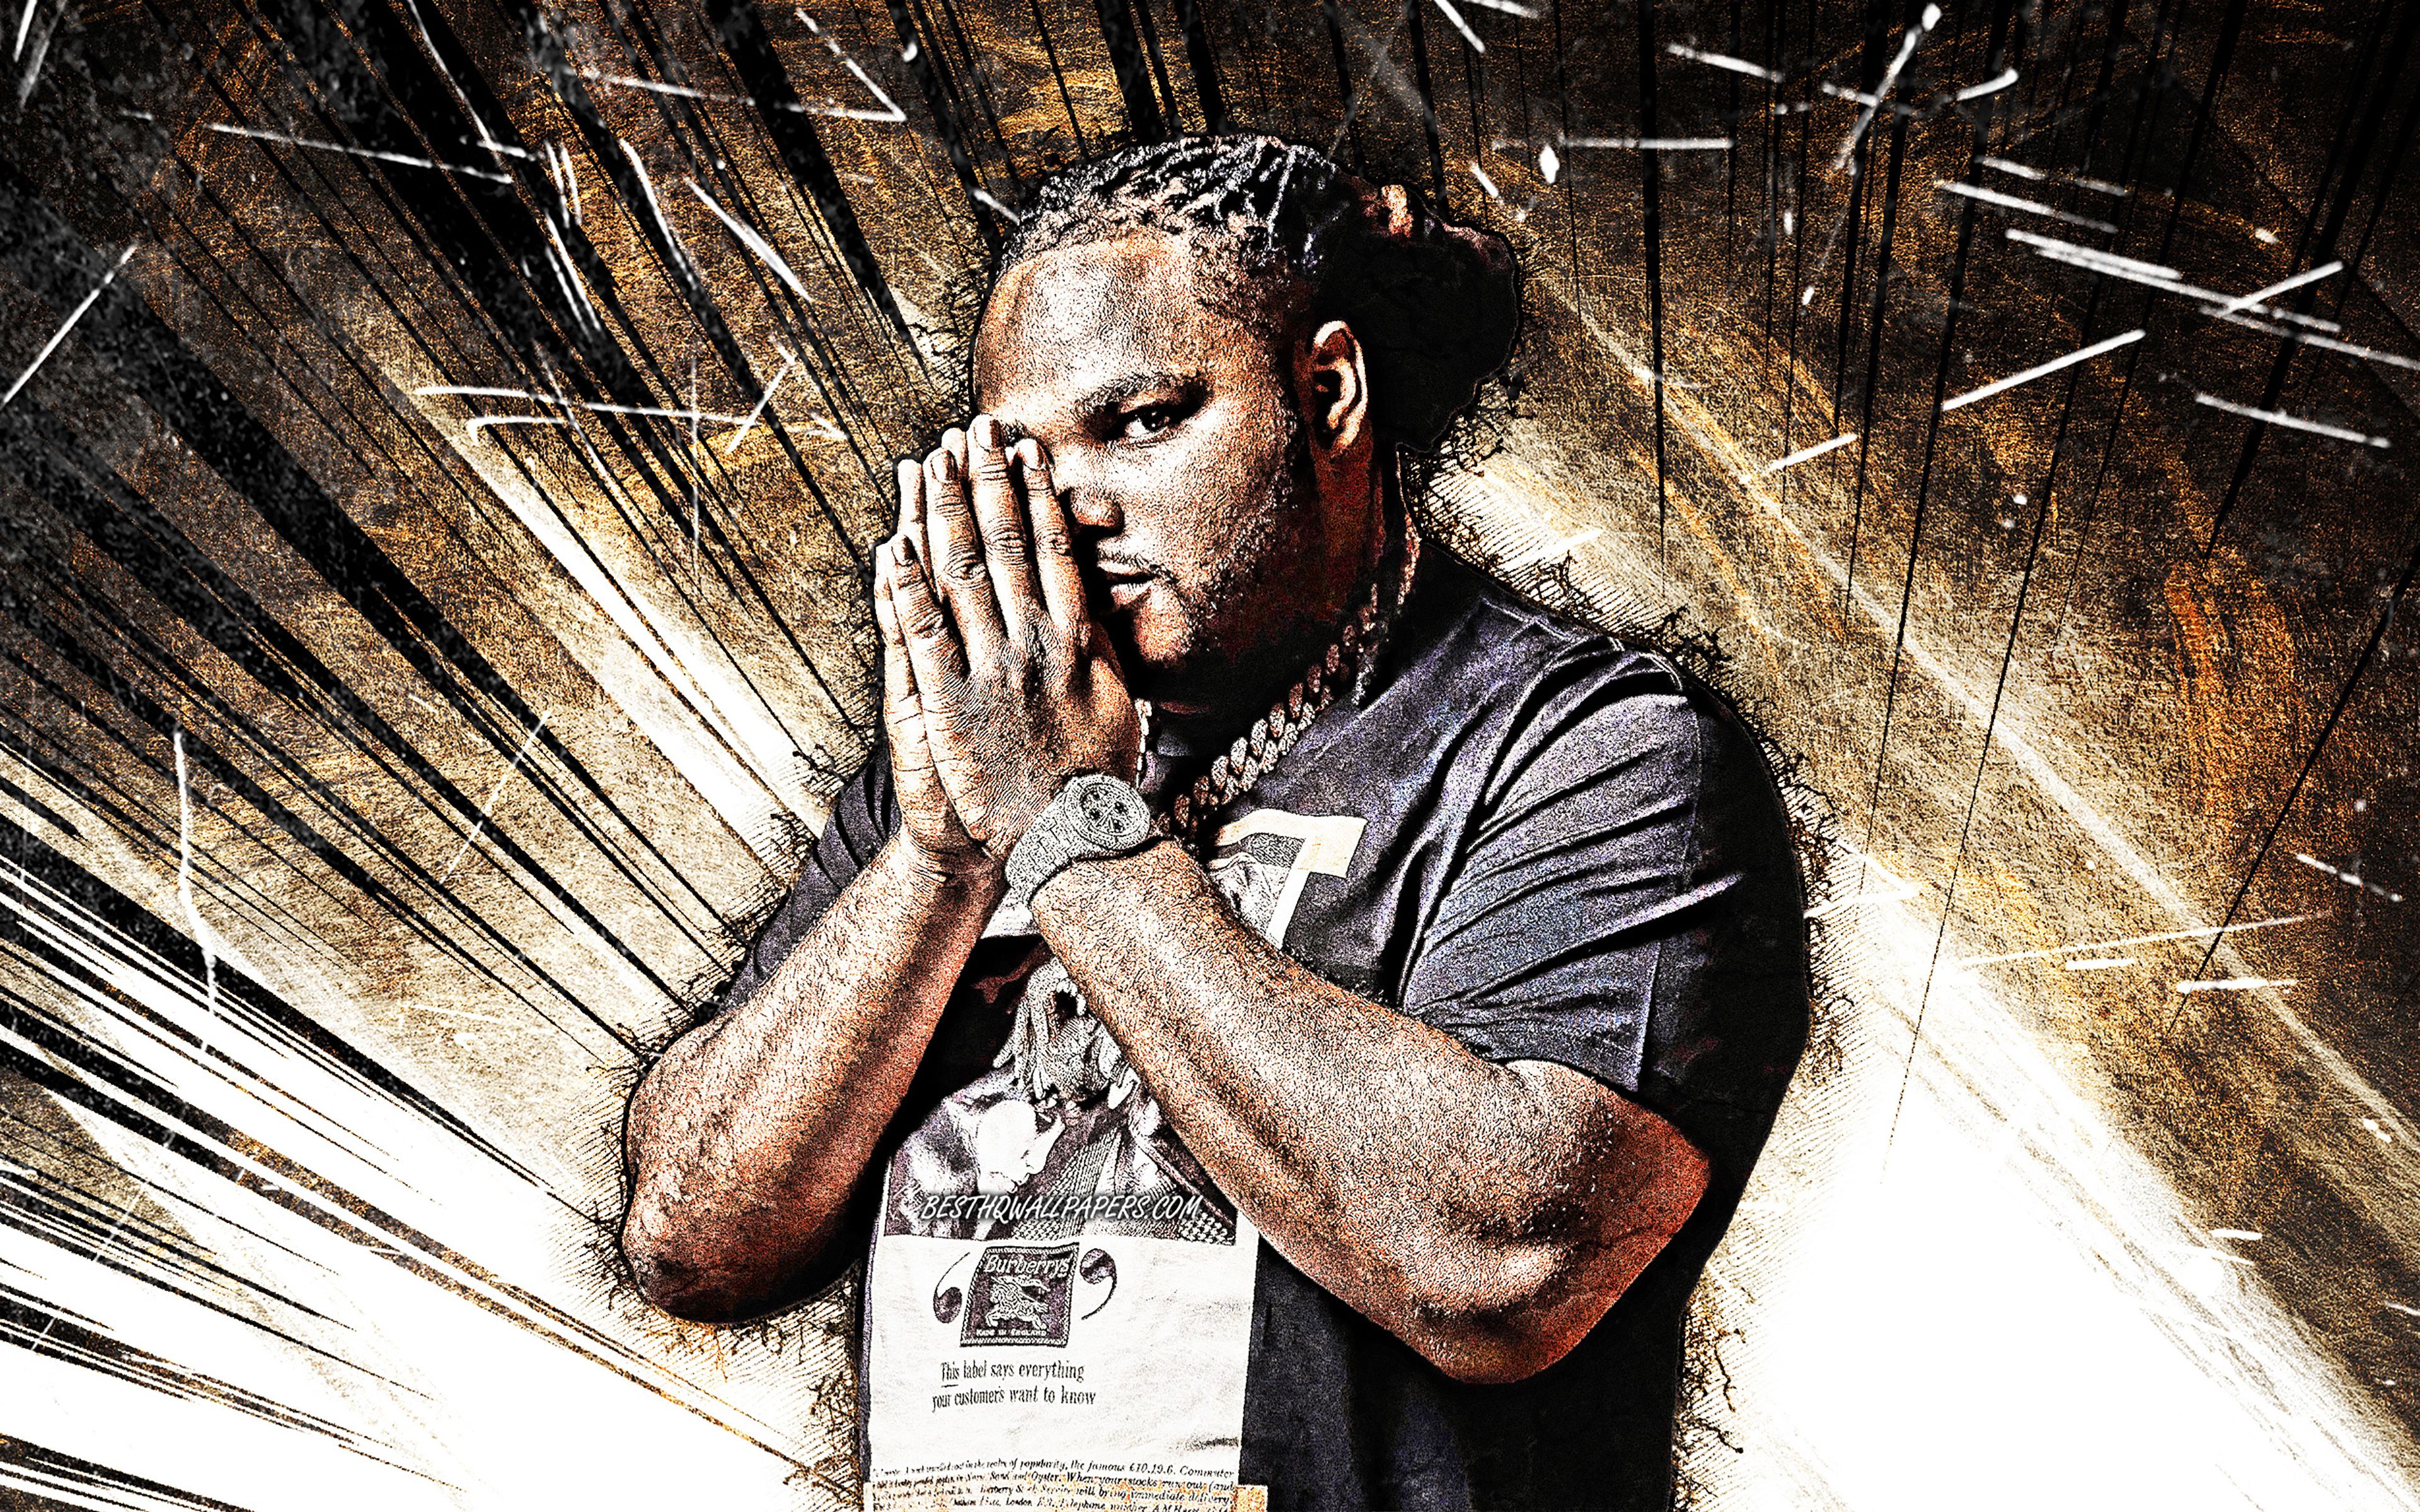 Download wallpaper 4k, Tee Grizzley, grunge art, american rapper, music stars, creative, Terry Sanchez Wallace Jr, brown abstract rays, american celebrity, Tee Grizzley 4K for desktop with resolution 3840x2400. High Quality HD